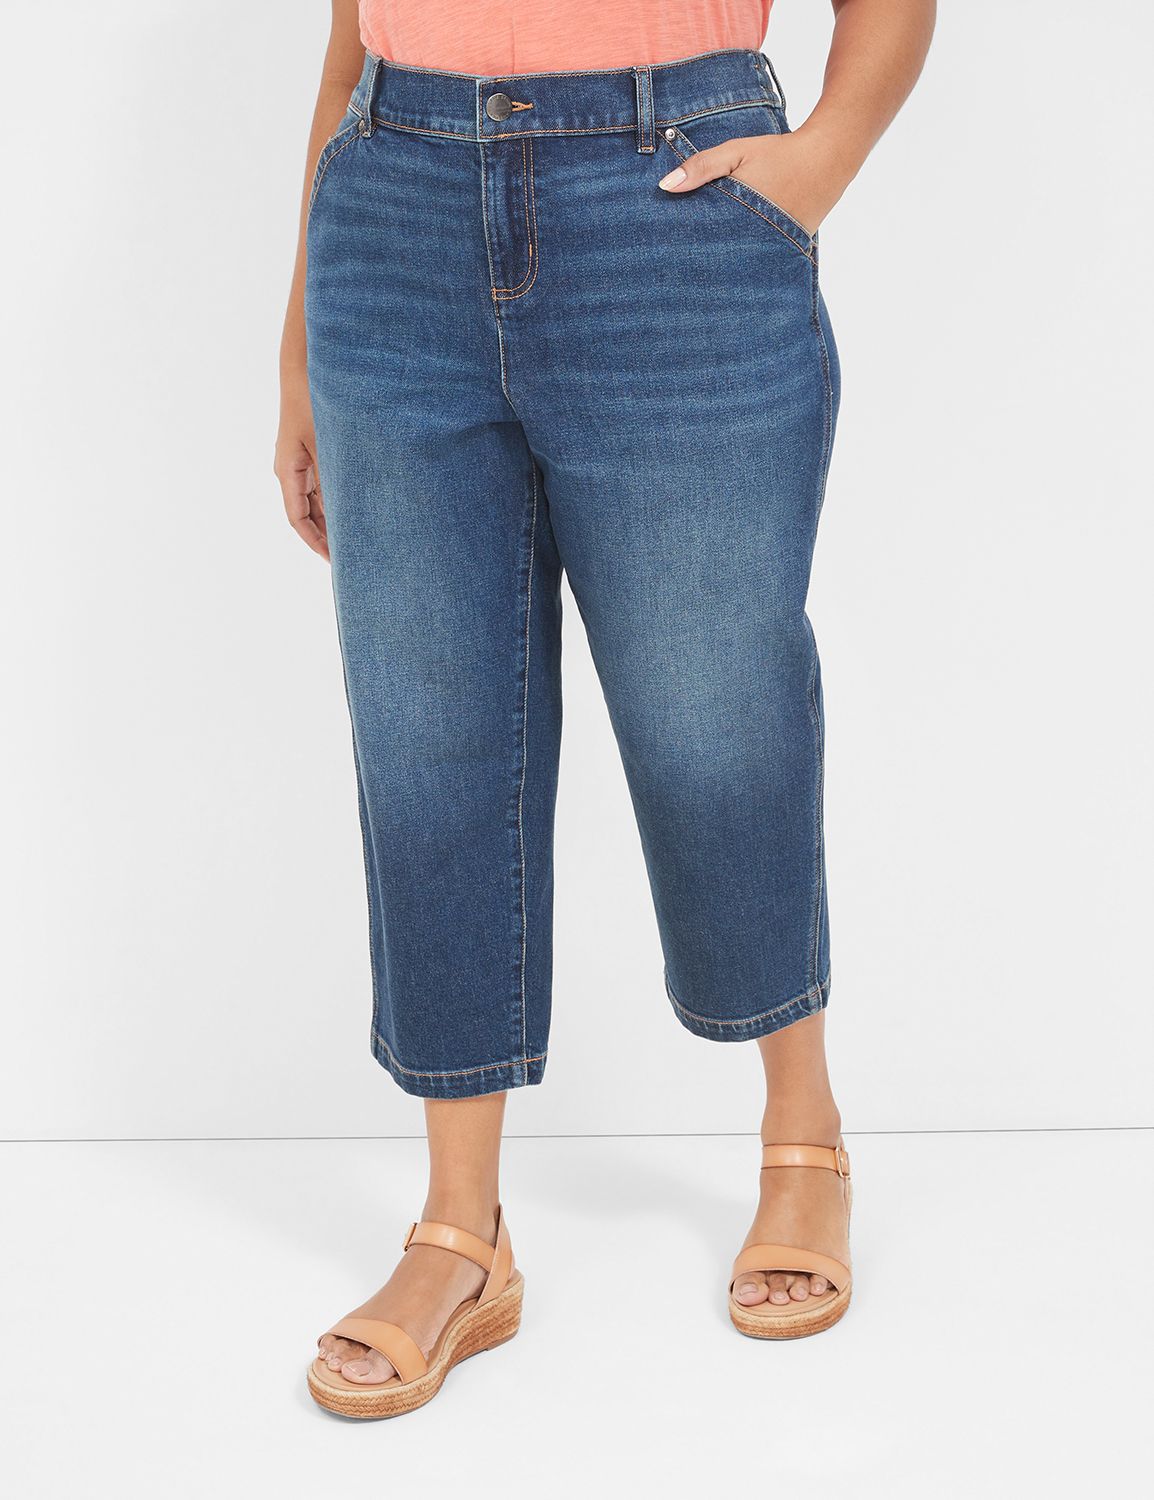 Lane Bryant on X: Have you tried our jeans with the new FLEX Magic  Waistband yet?! Plus, check out our denim event in stores this weekend!  #PlusSizeDenim #LaneBryantDenim #CurvyDenim Find a store